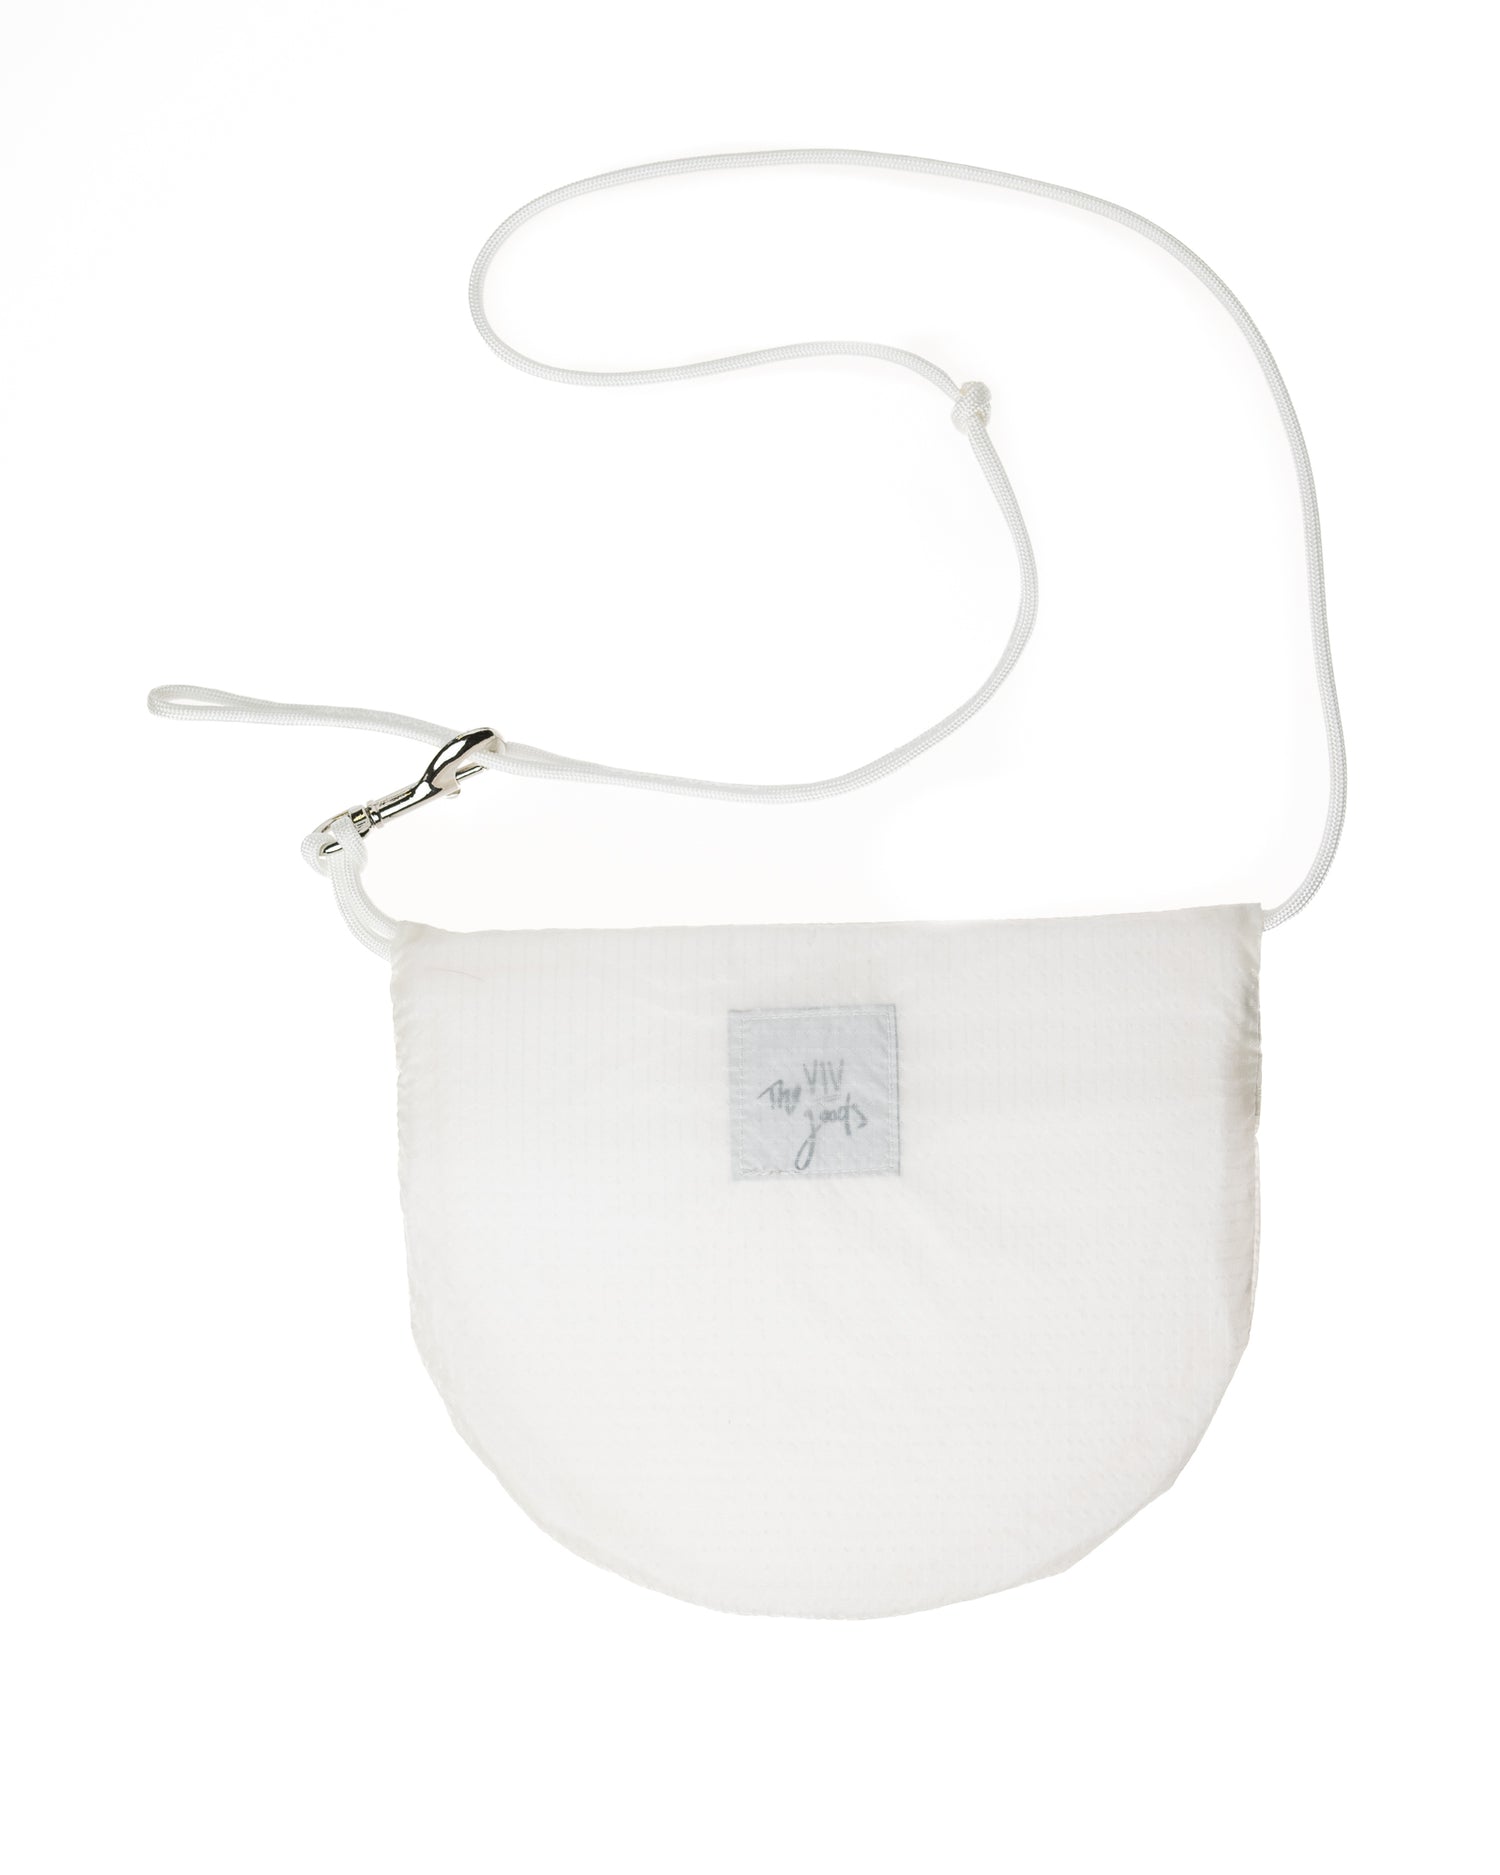 white / clear cross body bag made from upcycled paragliders